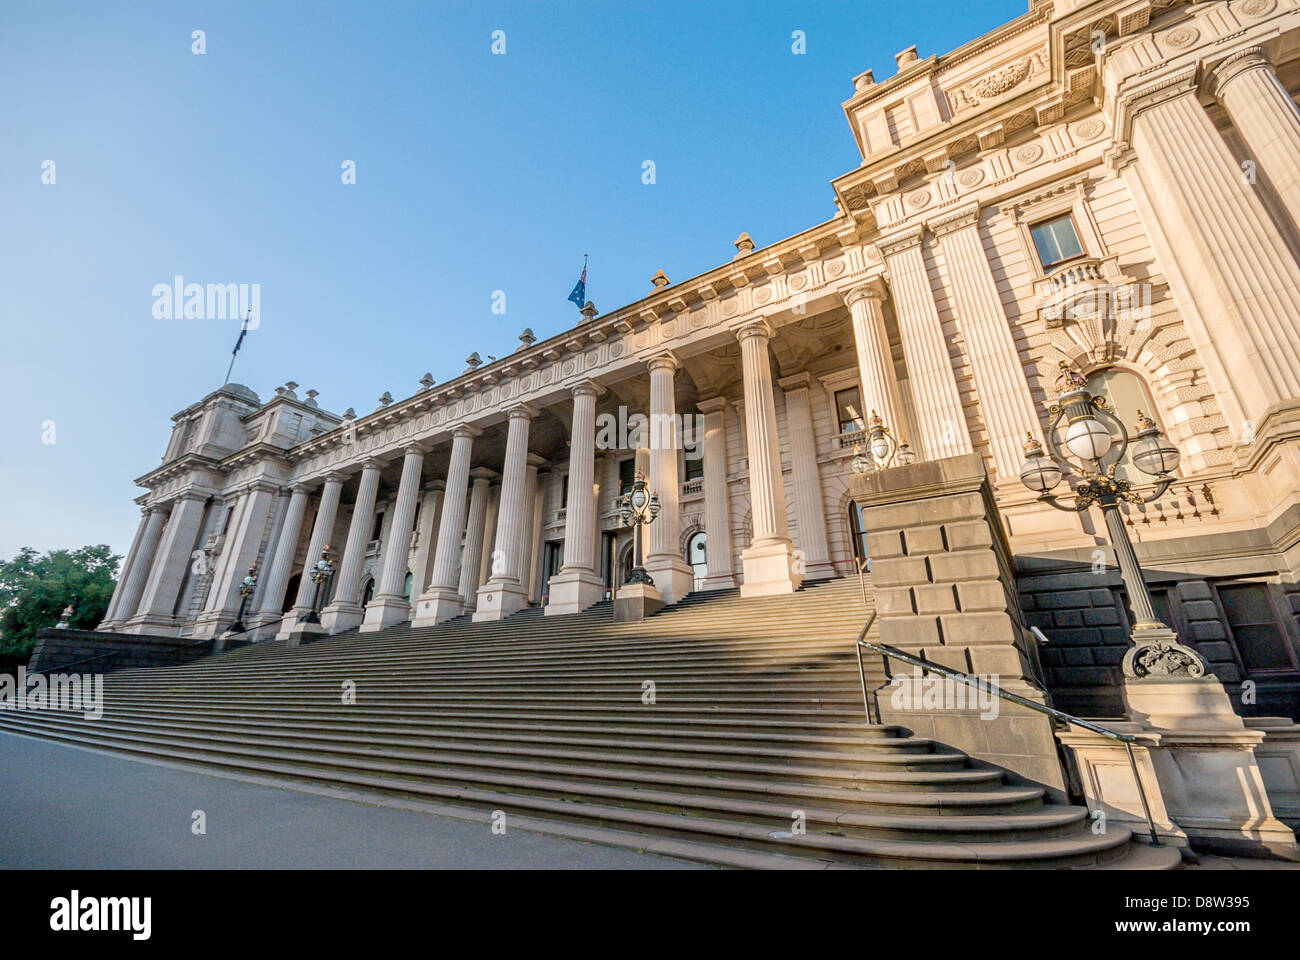 The elegant State parliament of Victoria, Australia where politicians and people's representatives debate and pass laws. Stock Photo